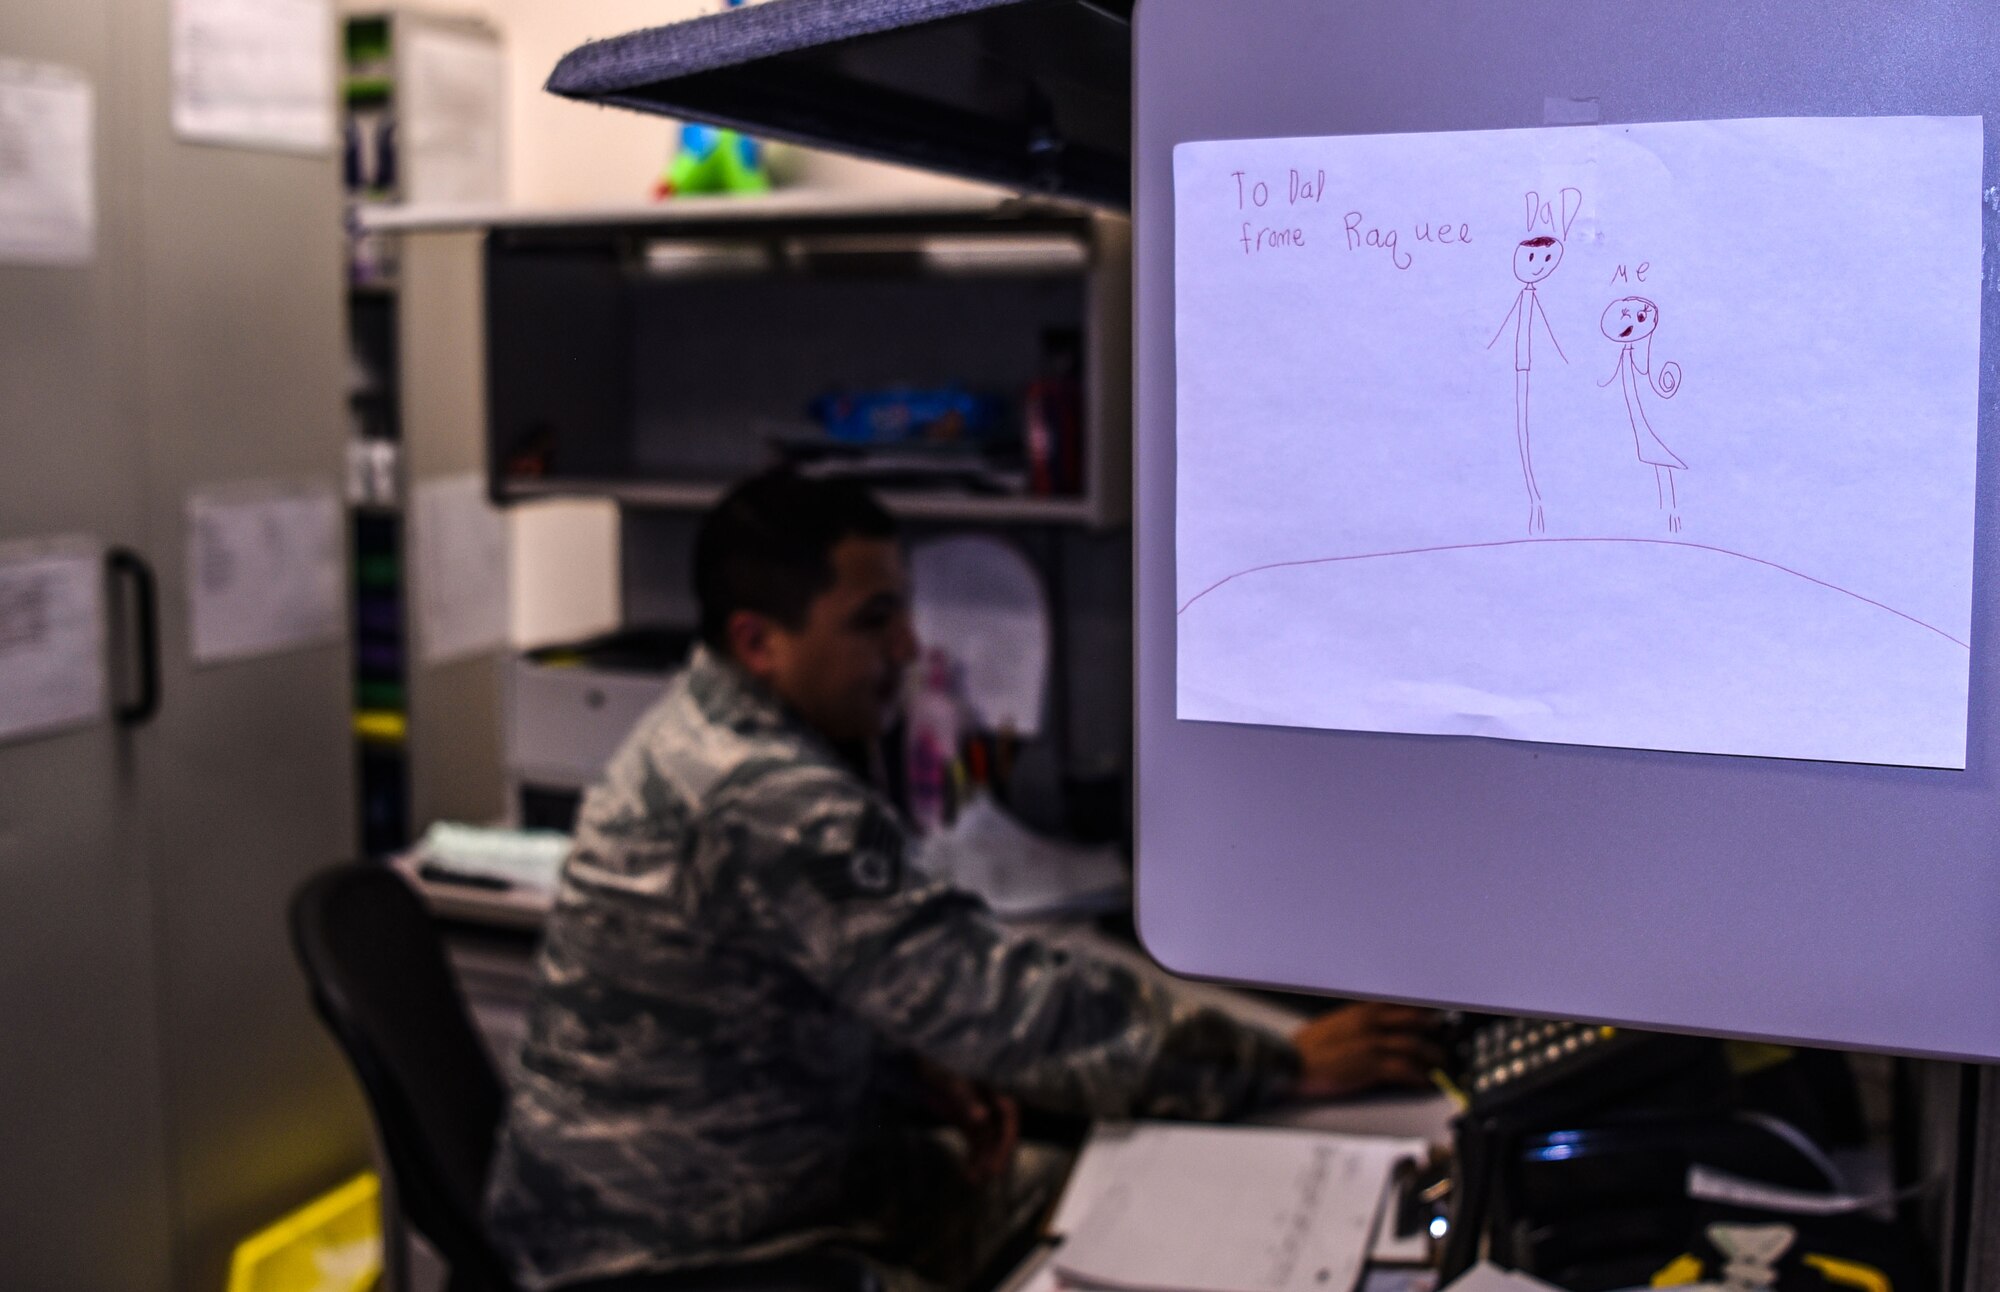 Staff Sgt. Miguel Guajardo, 90th Medical Group NCO in charge of logistics, works in his office in the dental clinic with a drawing from his child on the wall at F.E. Warren Air Force Base, Wyo., on Dec. 13, 2017. Miguel works with his wife in the clinic and they are proving it is possible to be successful together at home and work. Success for this couple means putting family first.